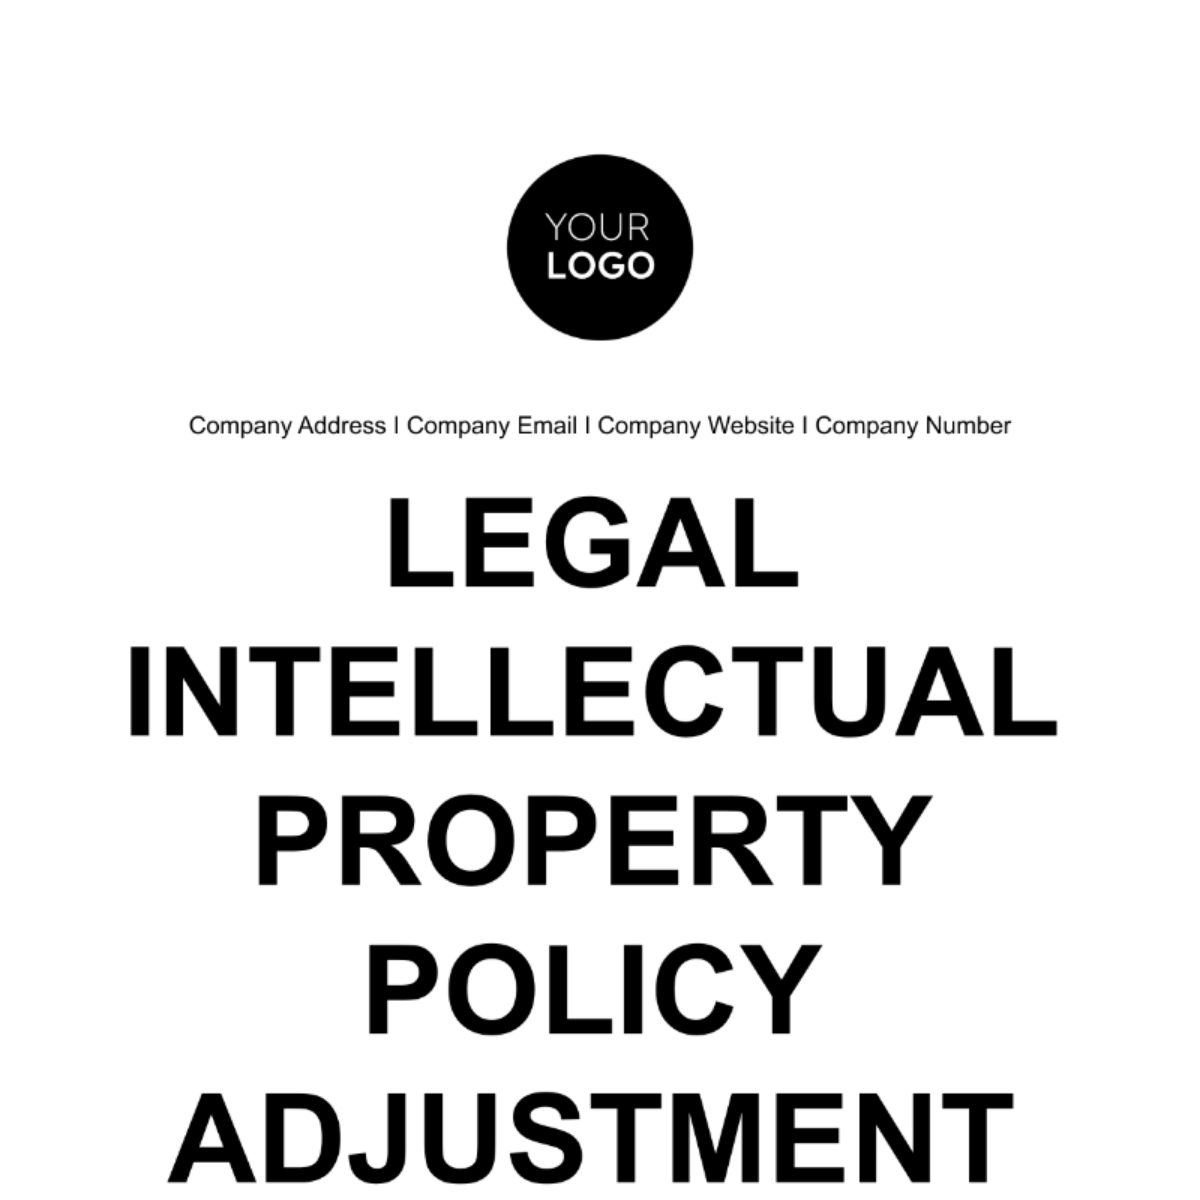 Free Legal Intellectual Property Policy Adjustment Plan Template